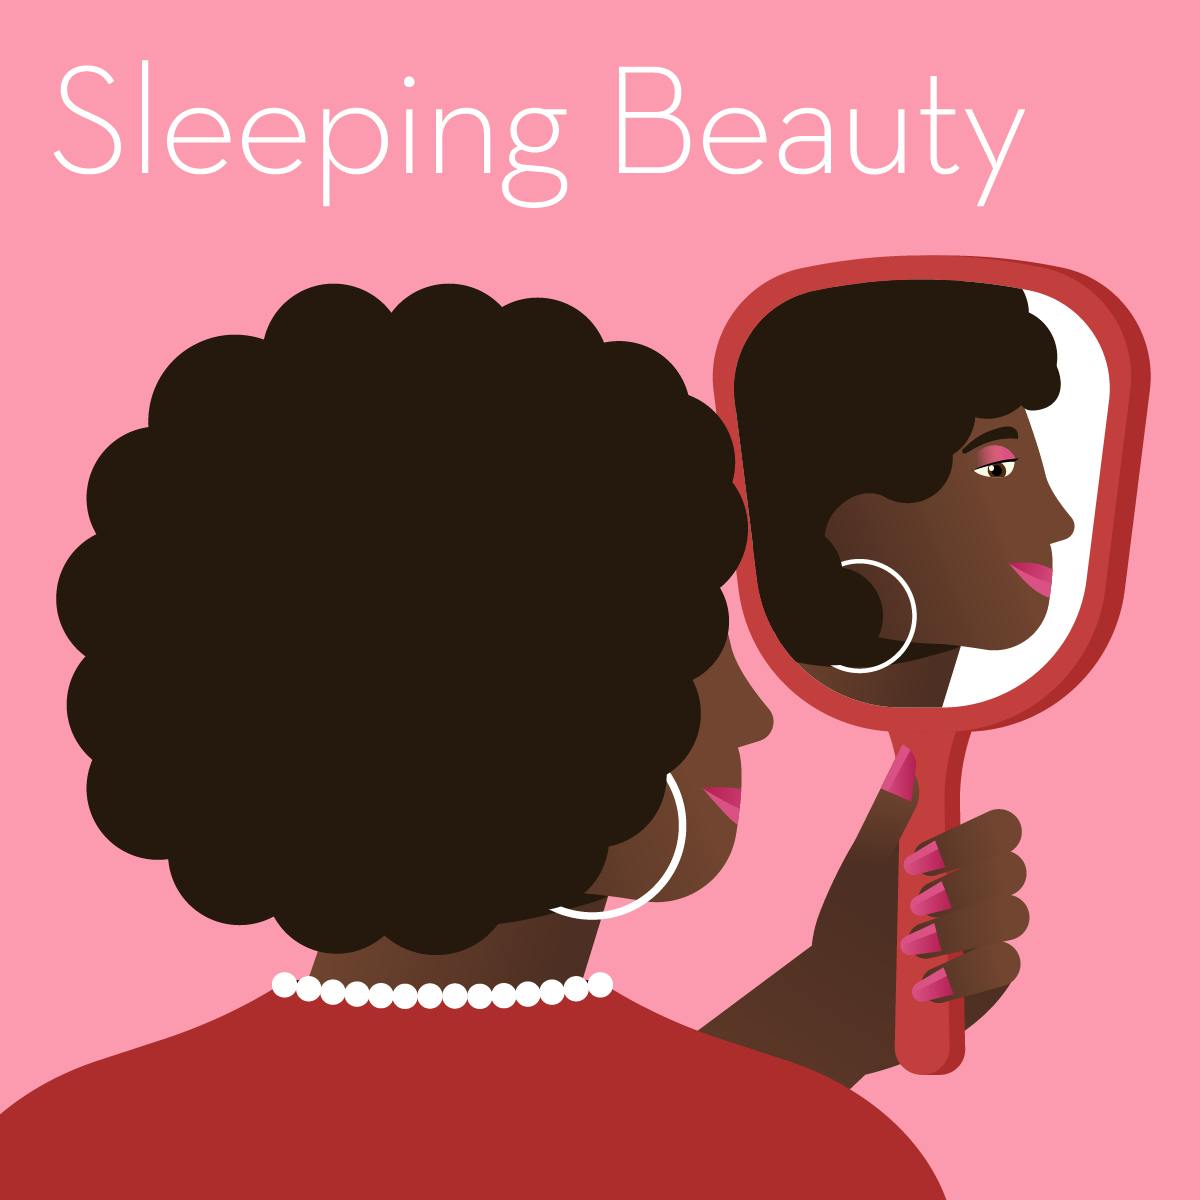 Illustration of a gift guide for helping get a peaceful sleep. Shows a Black woman holding a mirror.